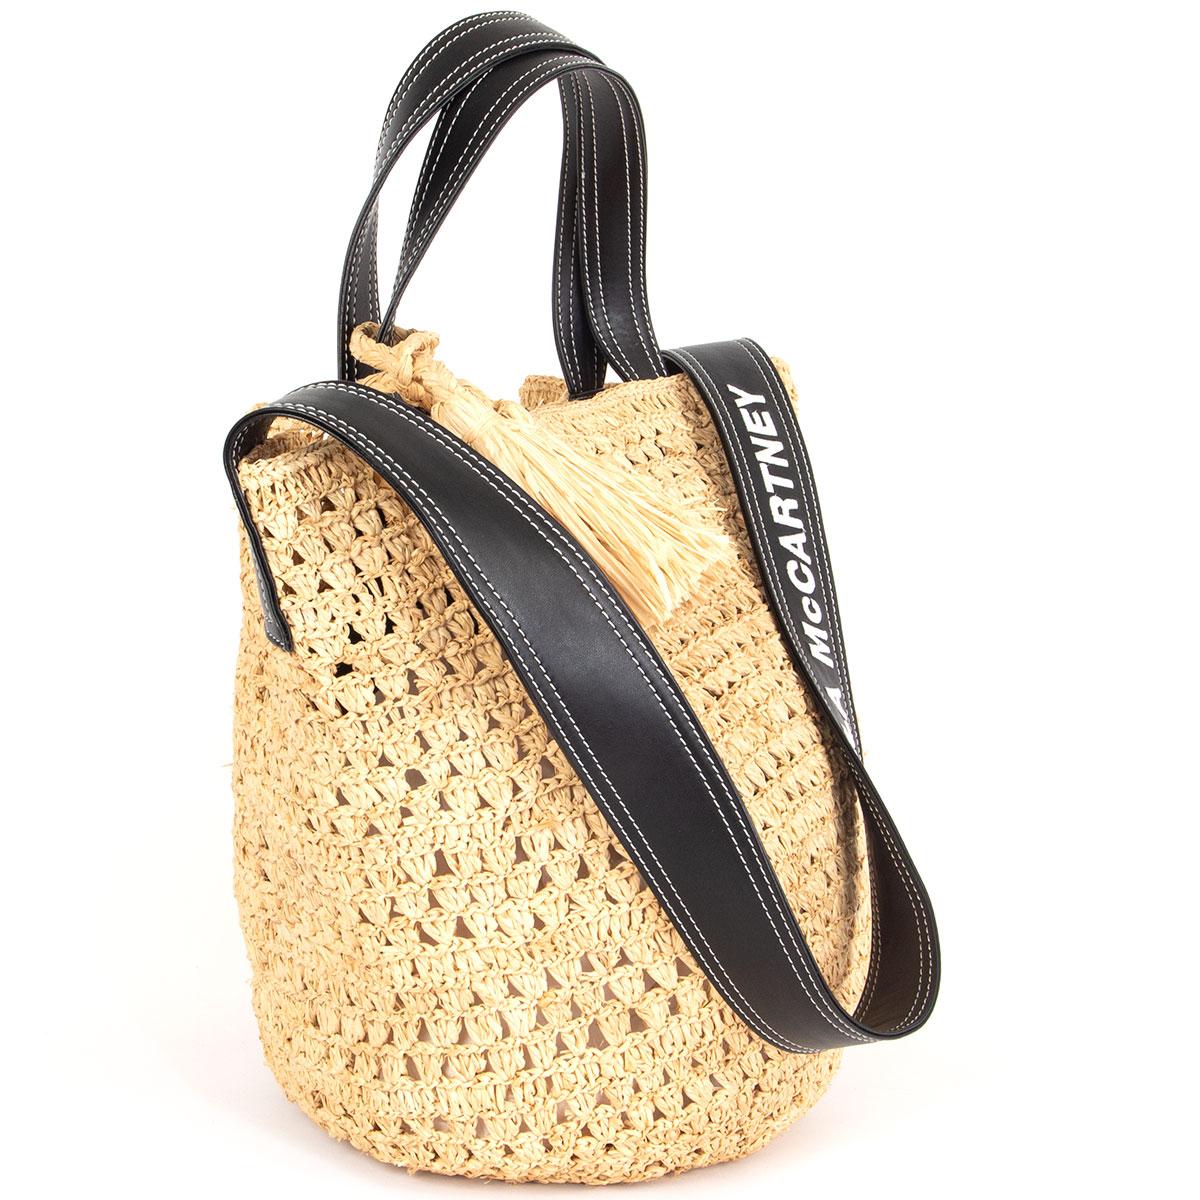 100% authentic Stella McCartney tote bag in crochet beige raffia with black faux-leather trim, handles and logo-embossed shoulder strap. Opens with a magnetic button on top. Unlined with one zipper pocket against the back and one open pocket against